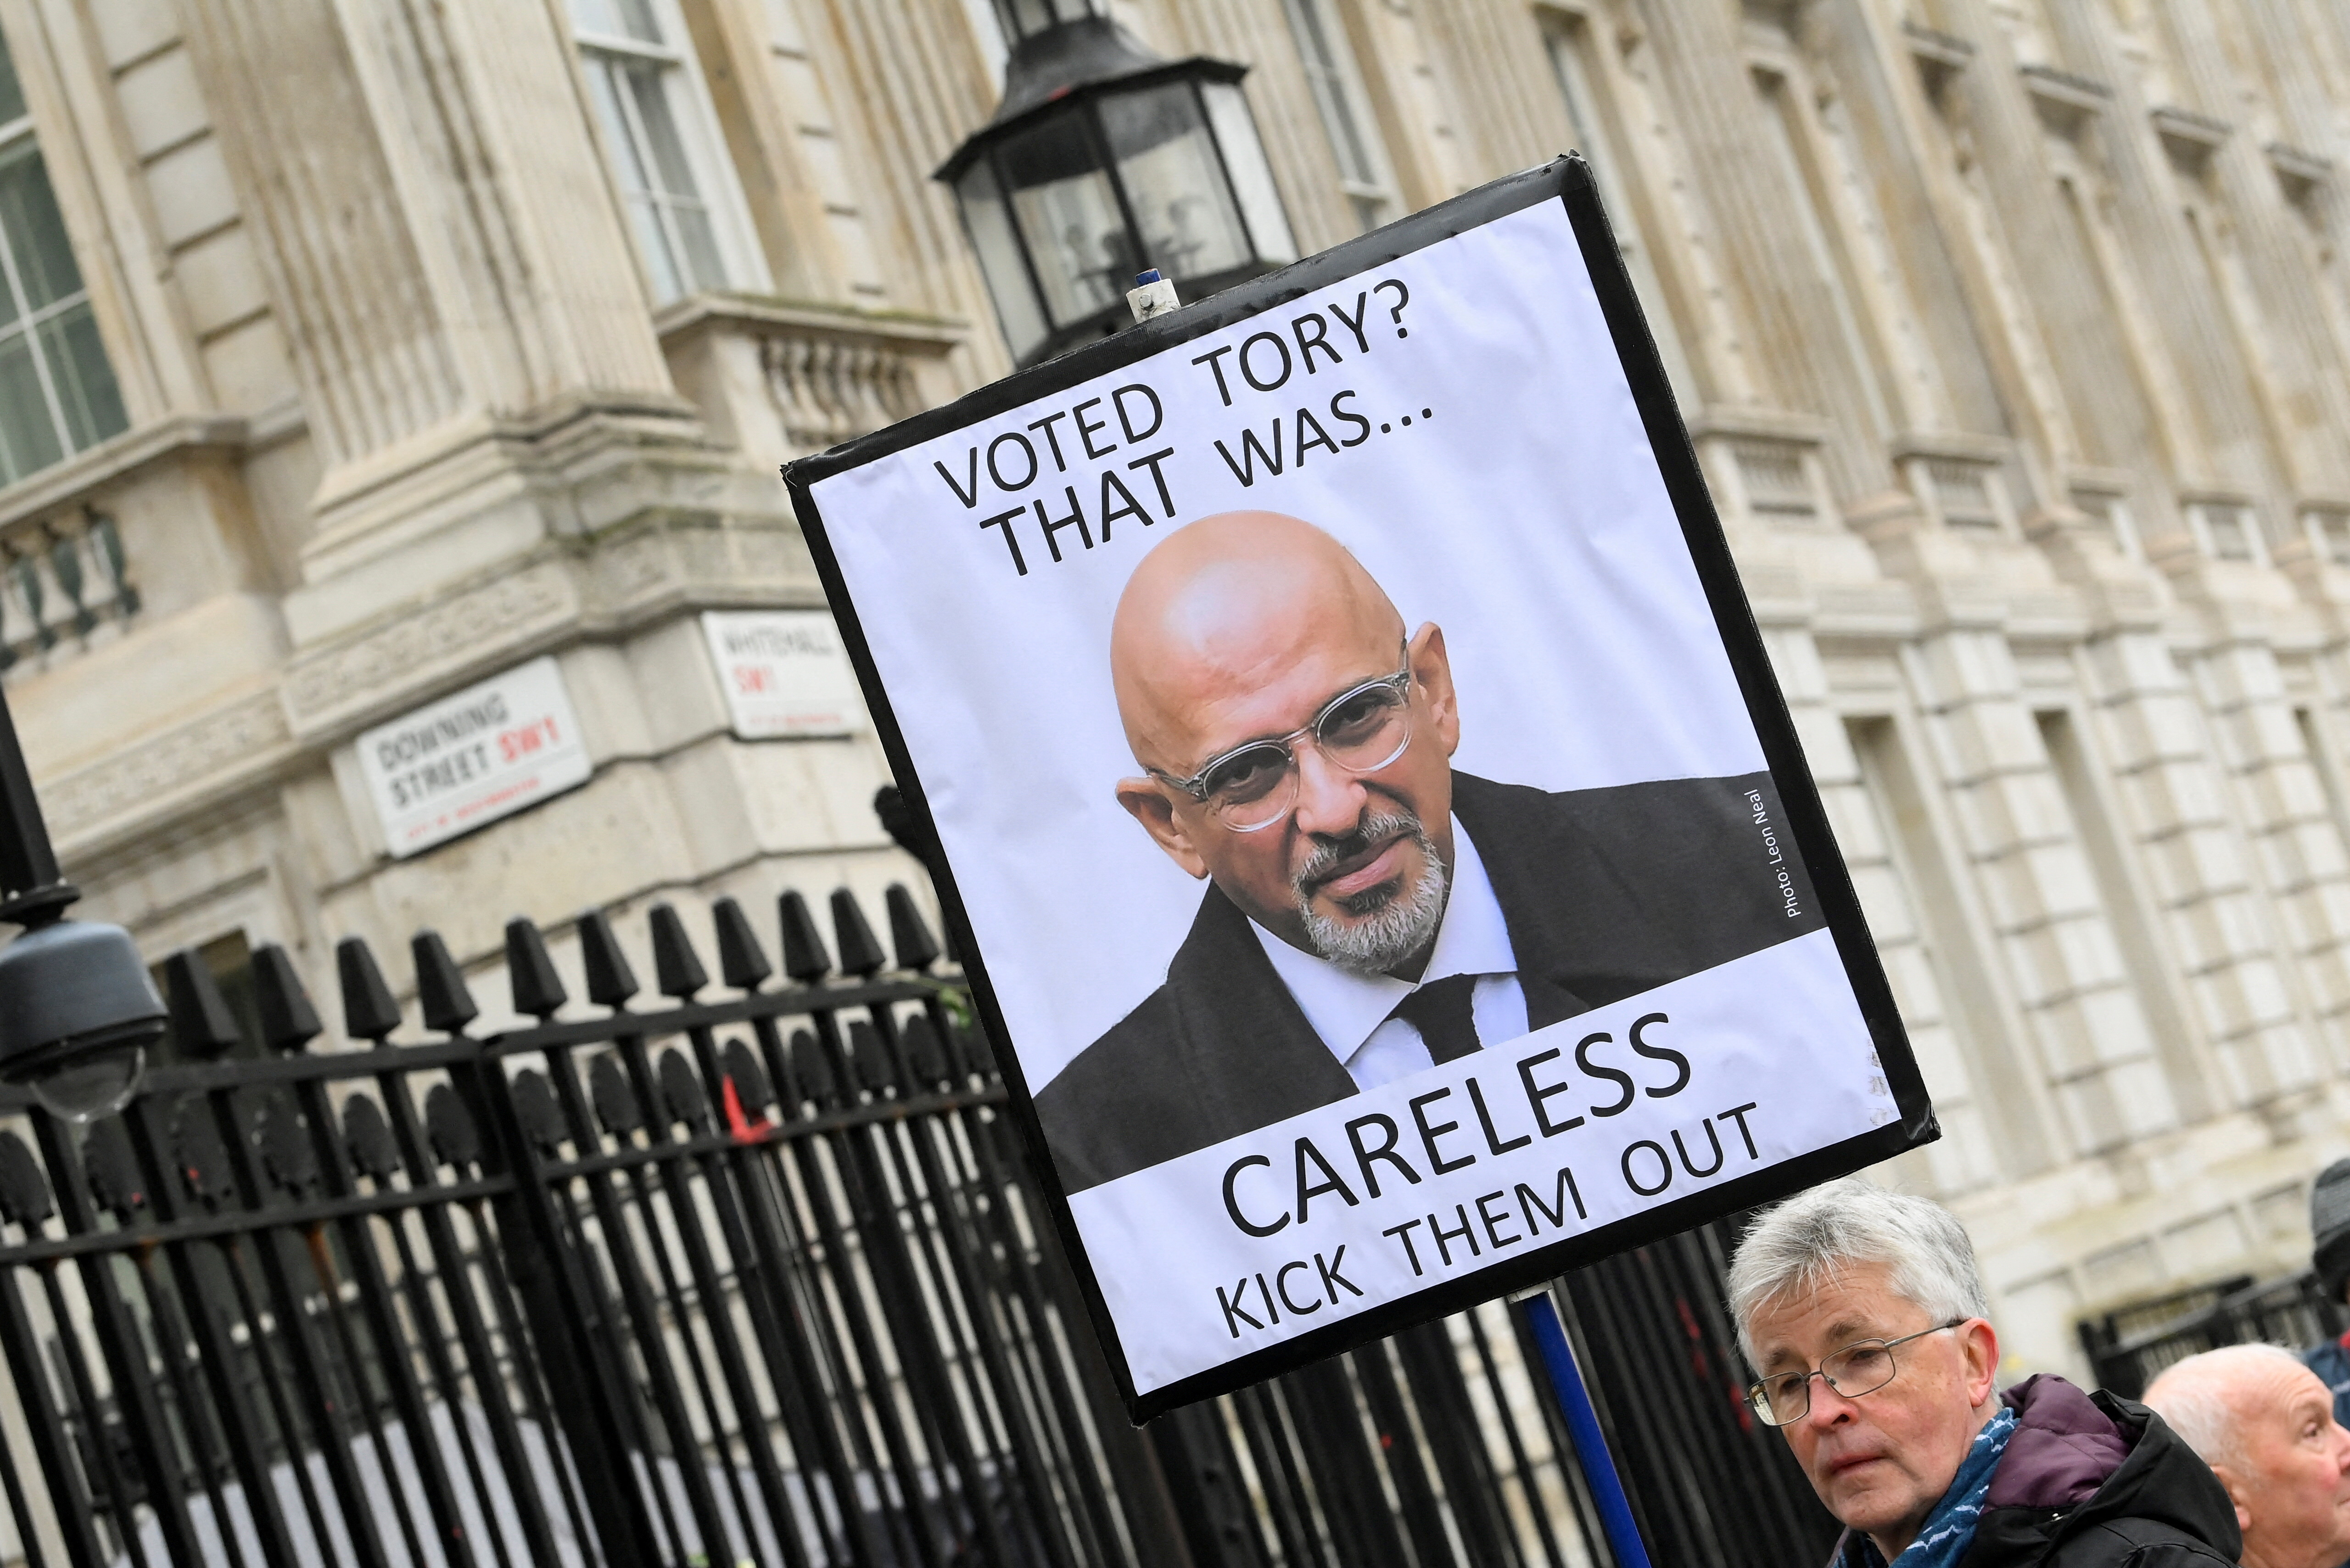 A protester stands outside Number 10 Downing Street, in London